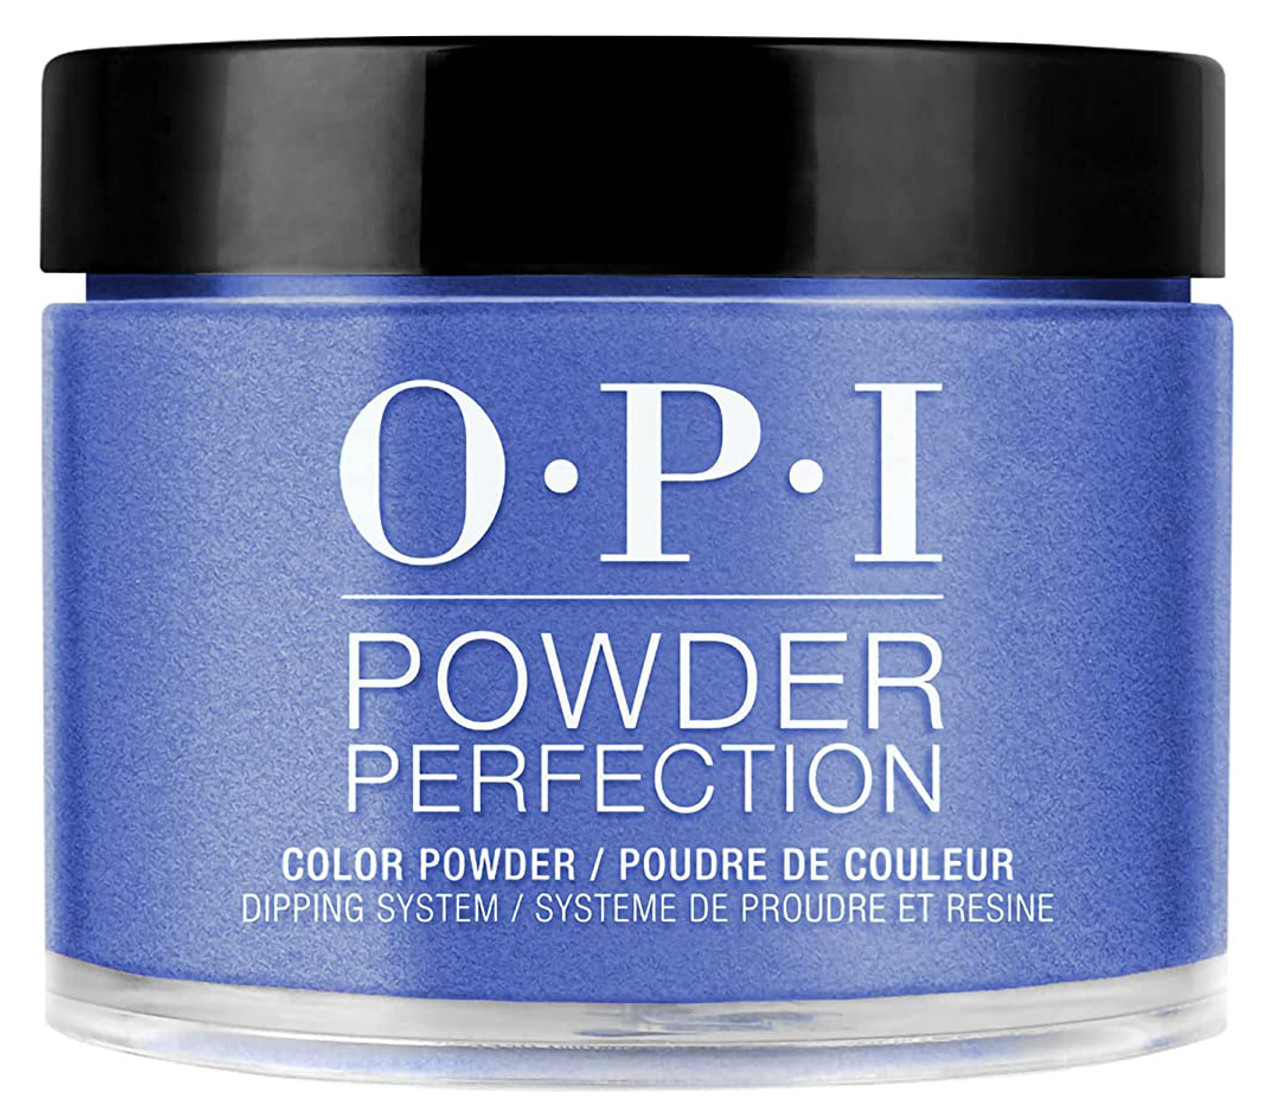 OPI Dipping Powder Perfection Midnight mantra - 1.5 oz / 43 G